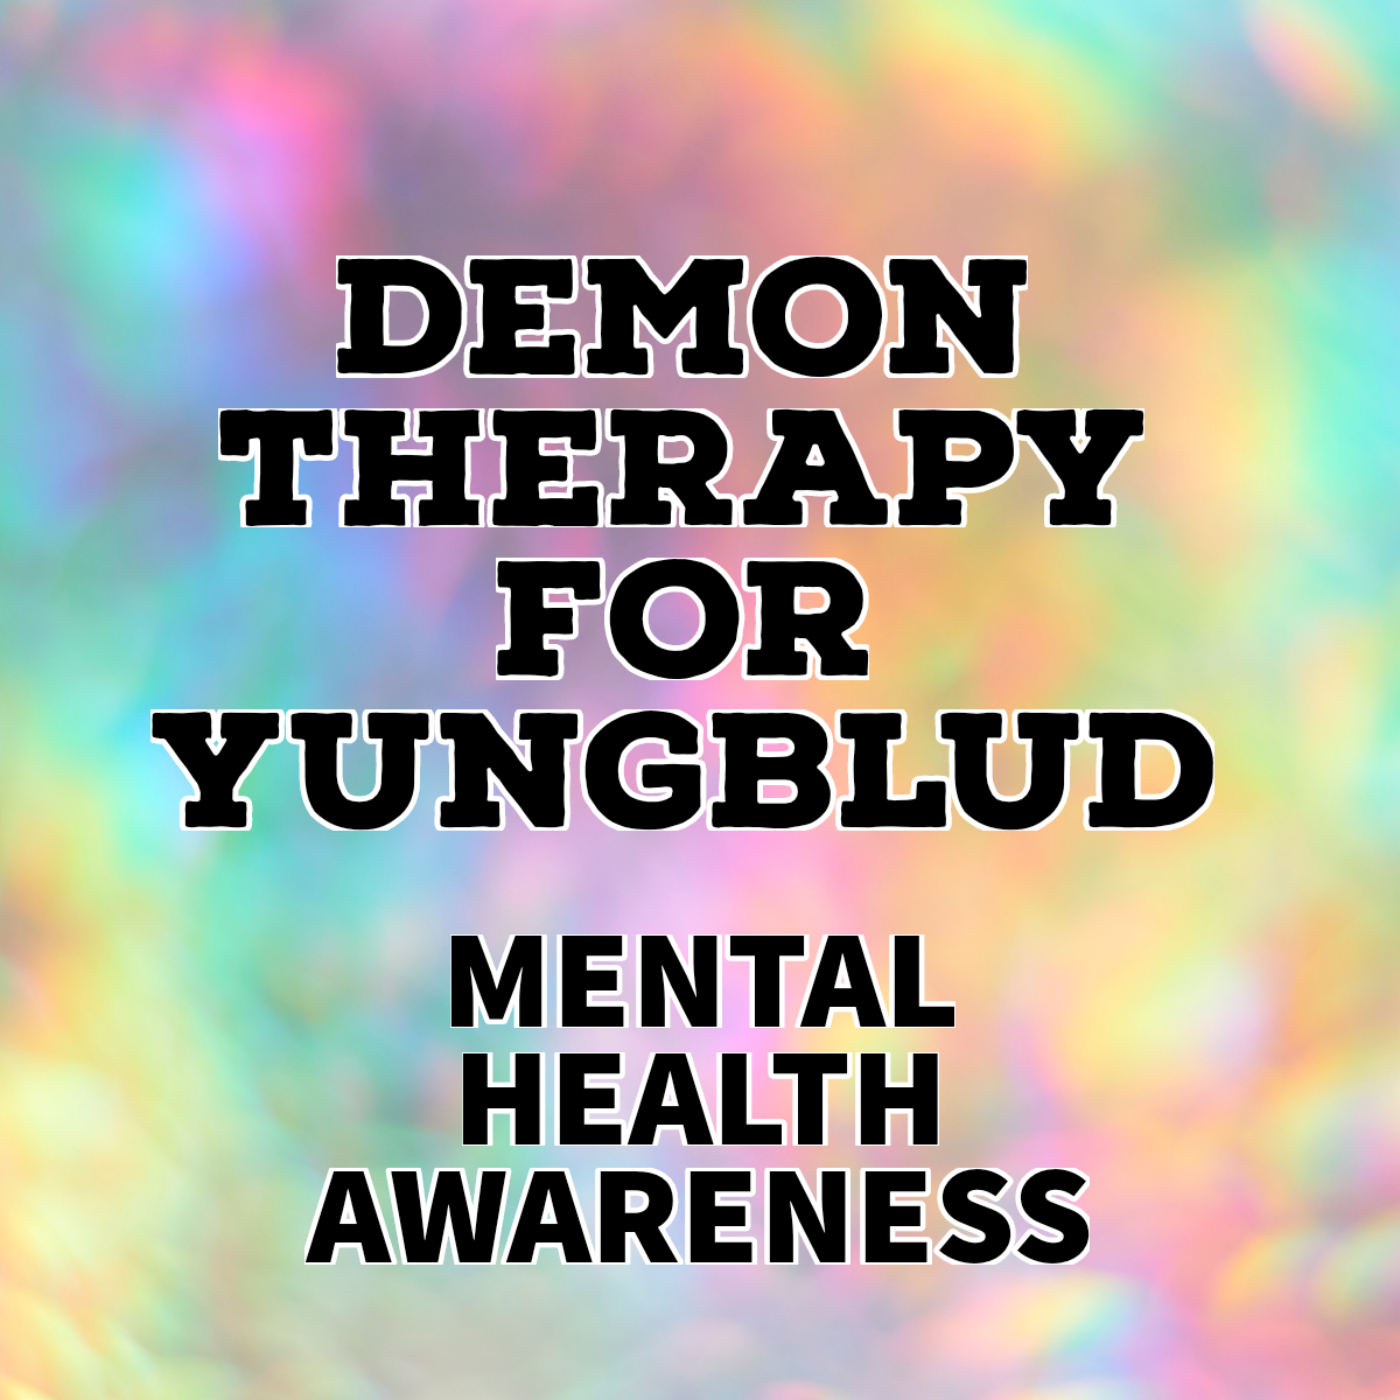 DEMON THERAPY FOR YUNGBLUD